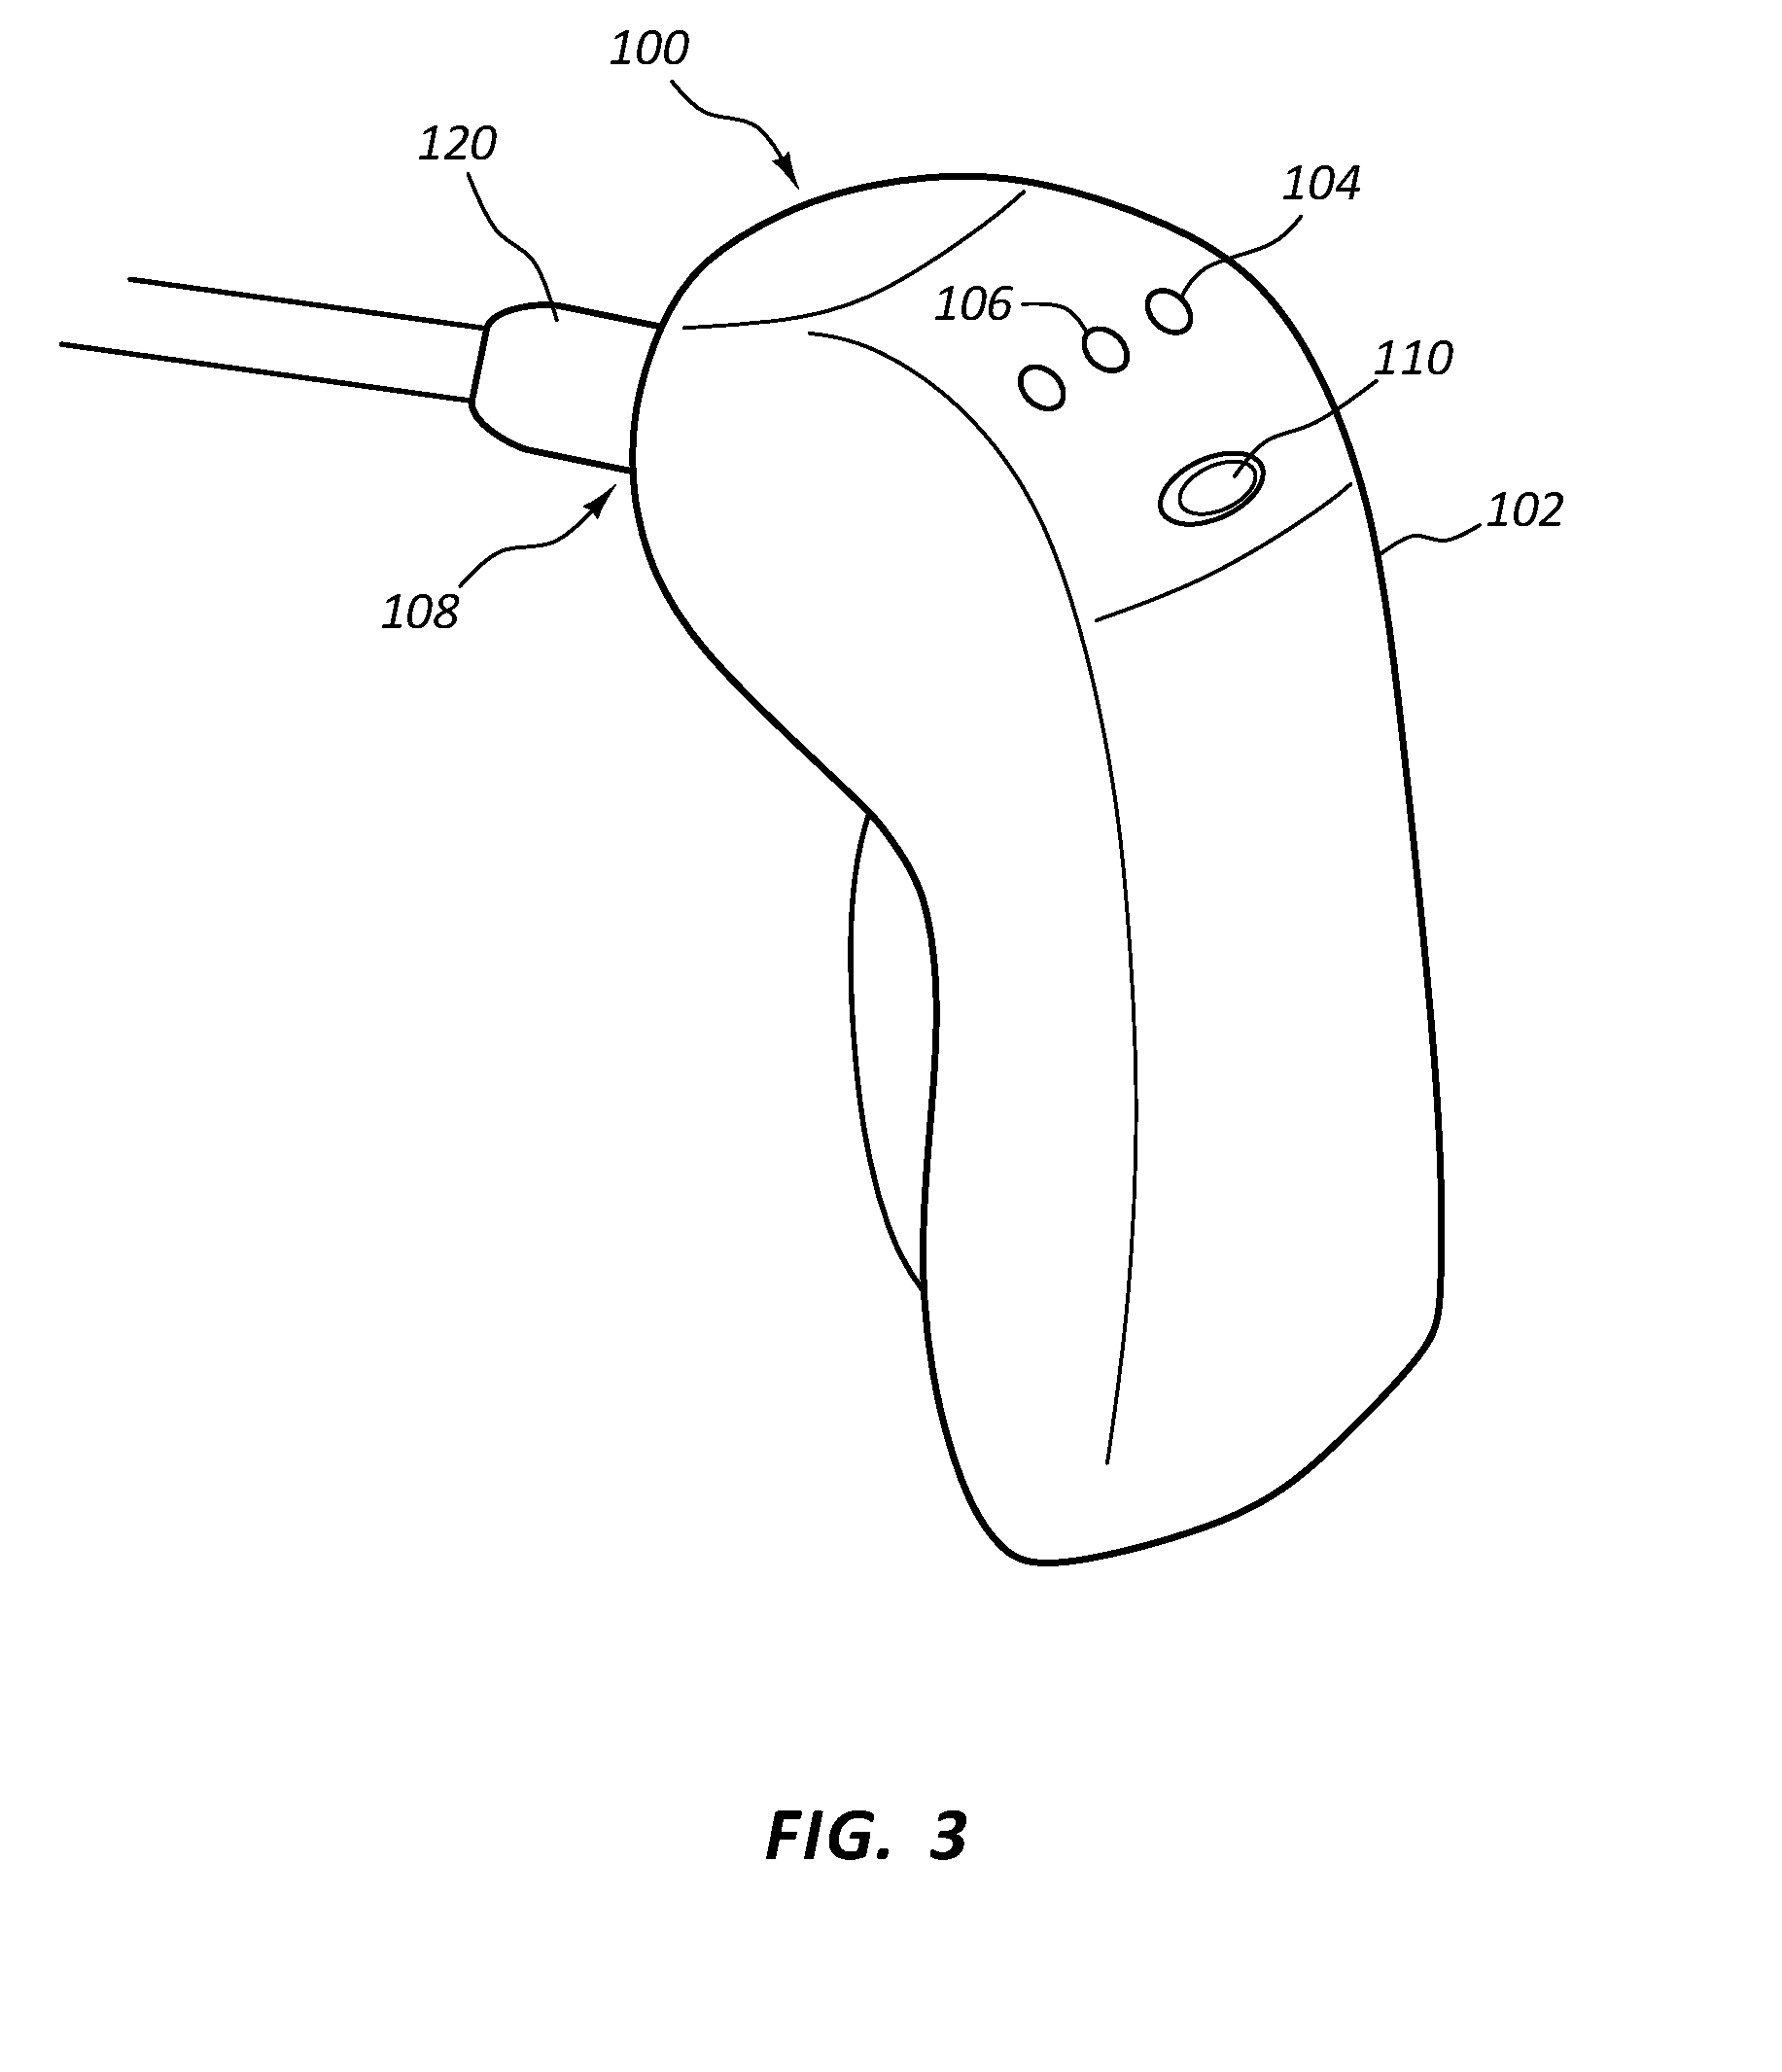 Systems and methods to monitor proper disinfection of needleless connectors